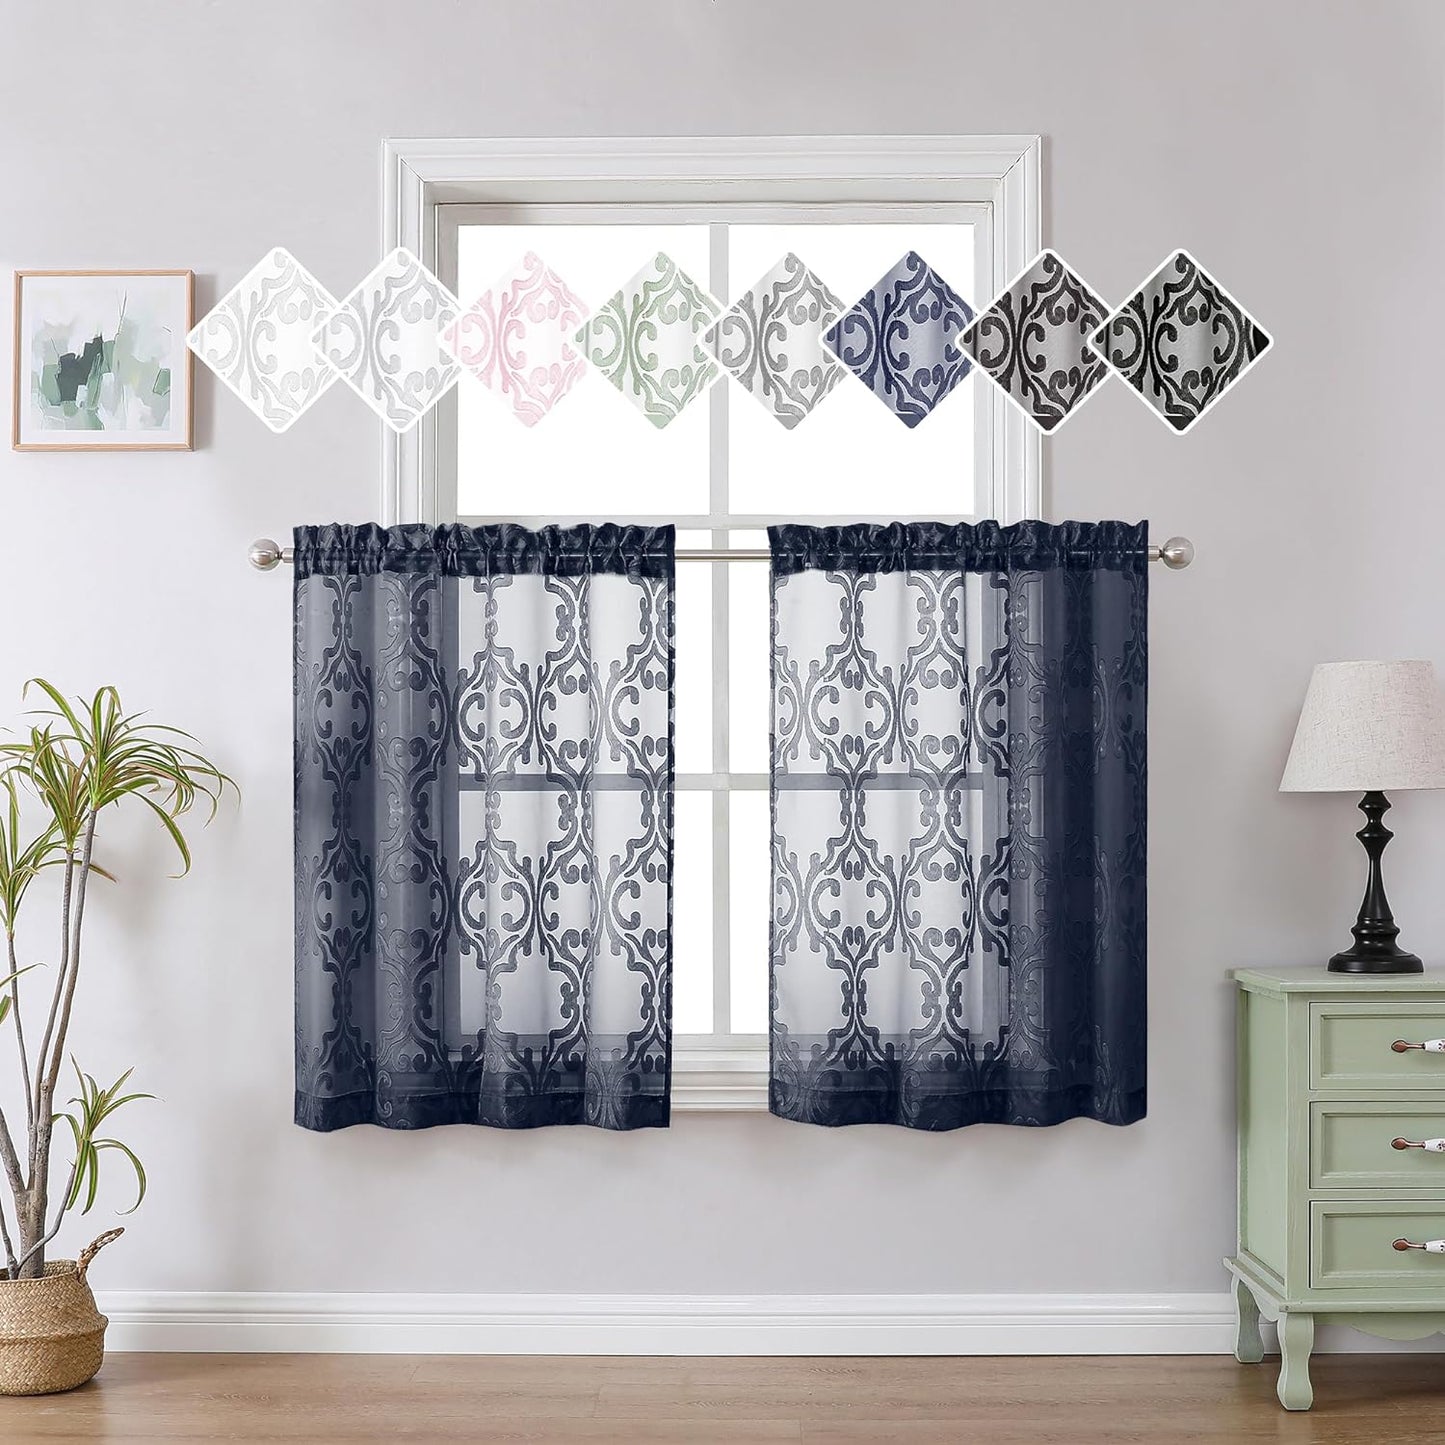 Aiyufeng Suri 2 Panels Sheer Sage Green Curtains 63 Inches Long, Light & Airy Privacy Textured Sheer Drapes, Dual Rod Pocket Voile Clipped Floral Luxury Panels for Bedroom Living Room, 42 X 63 Inch  Aiyufeng Navy Blue 2X42X36" 